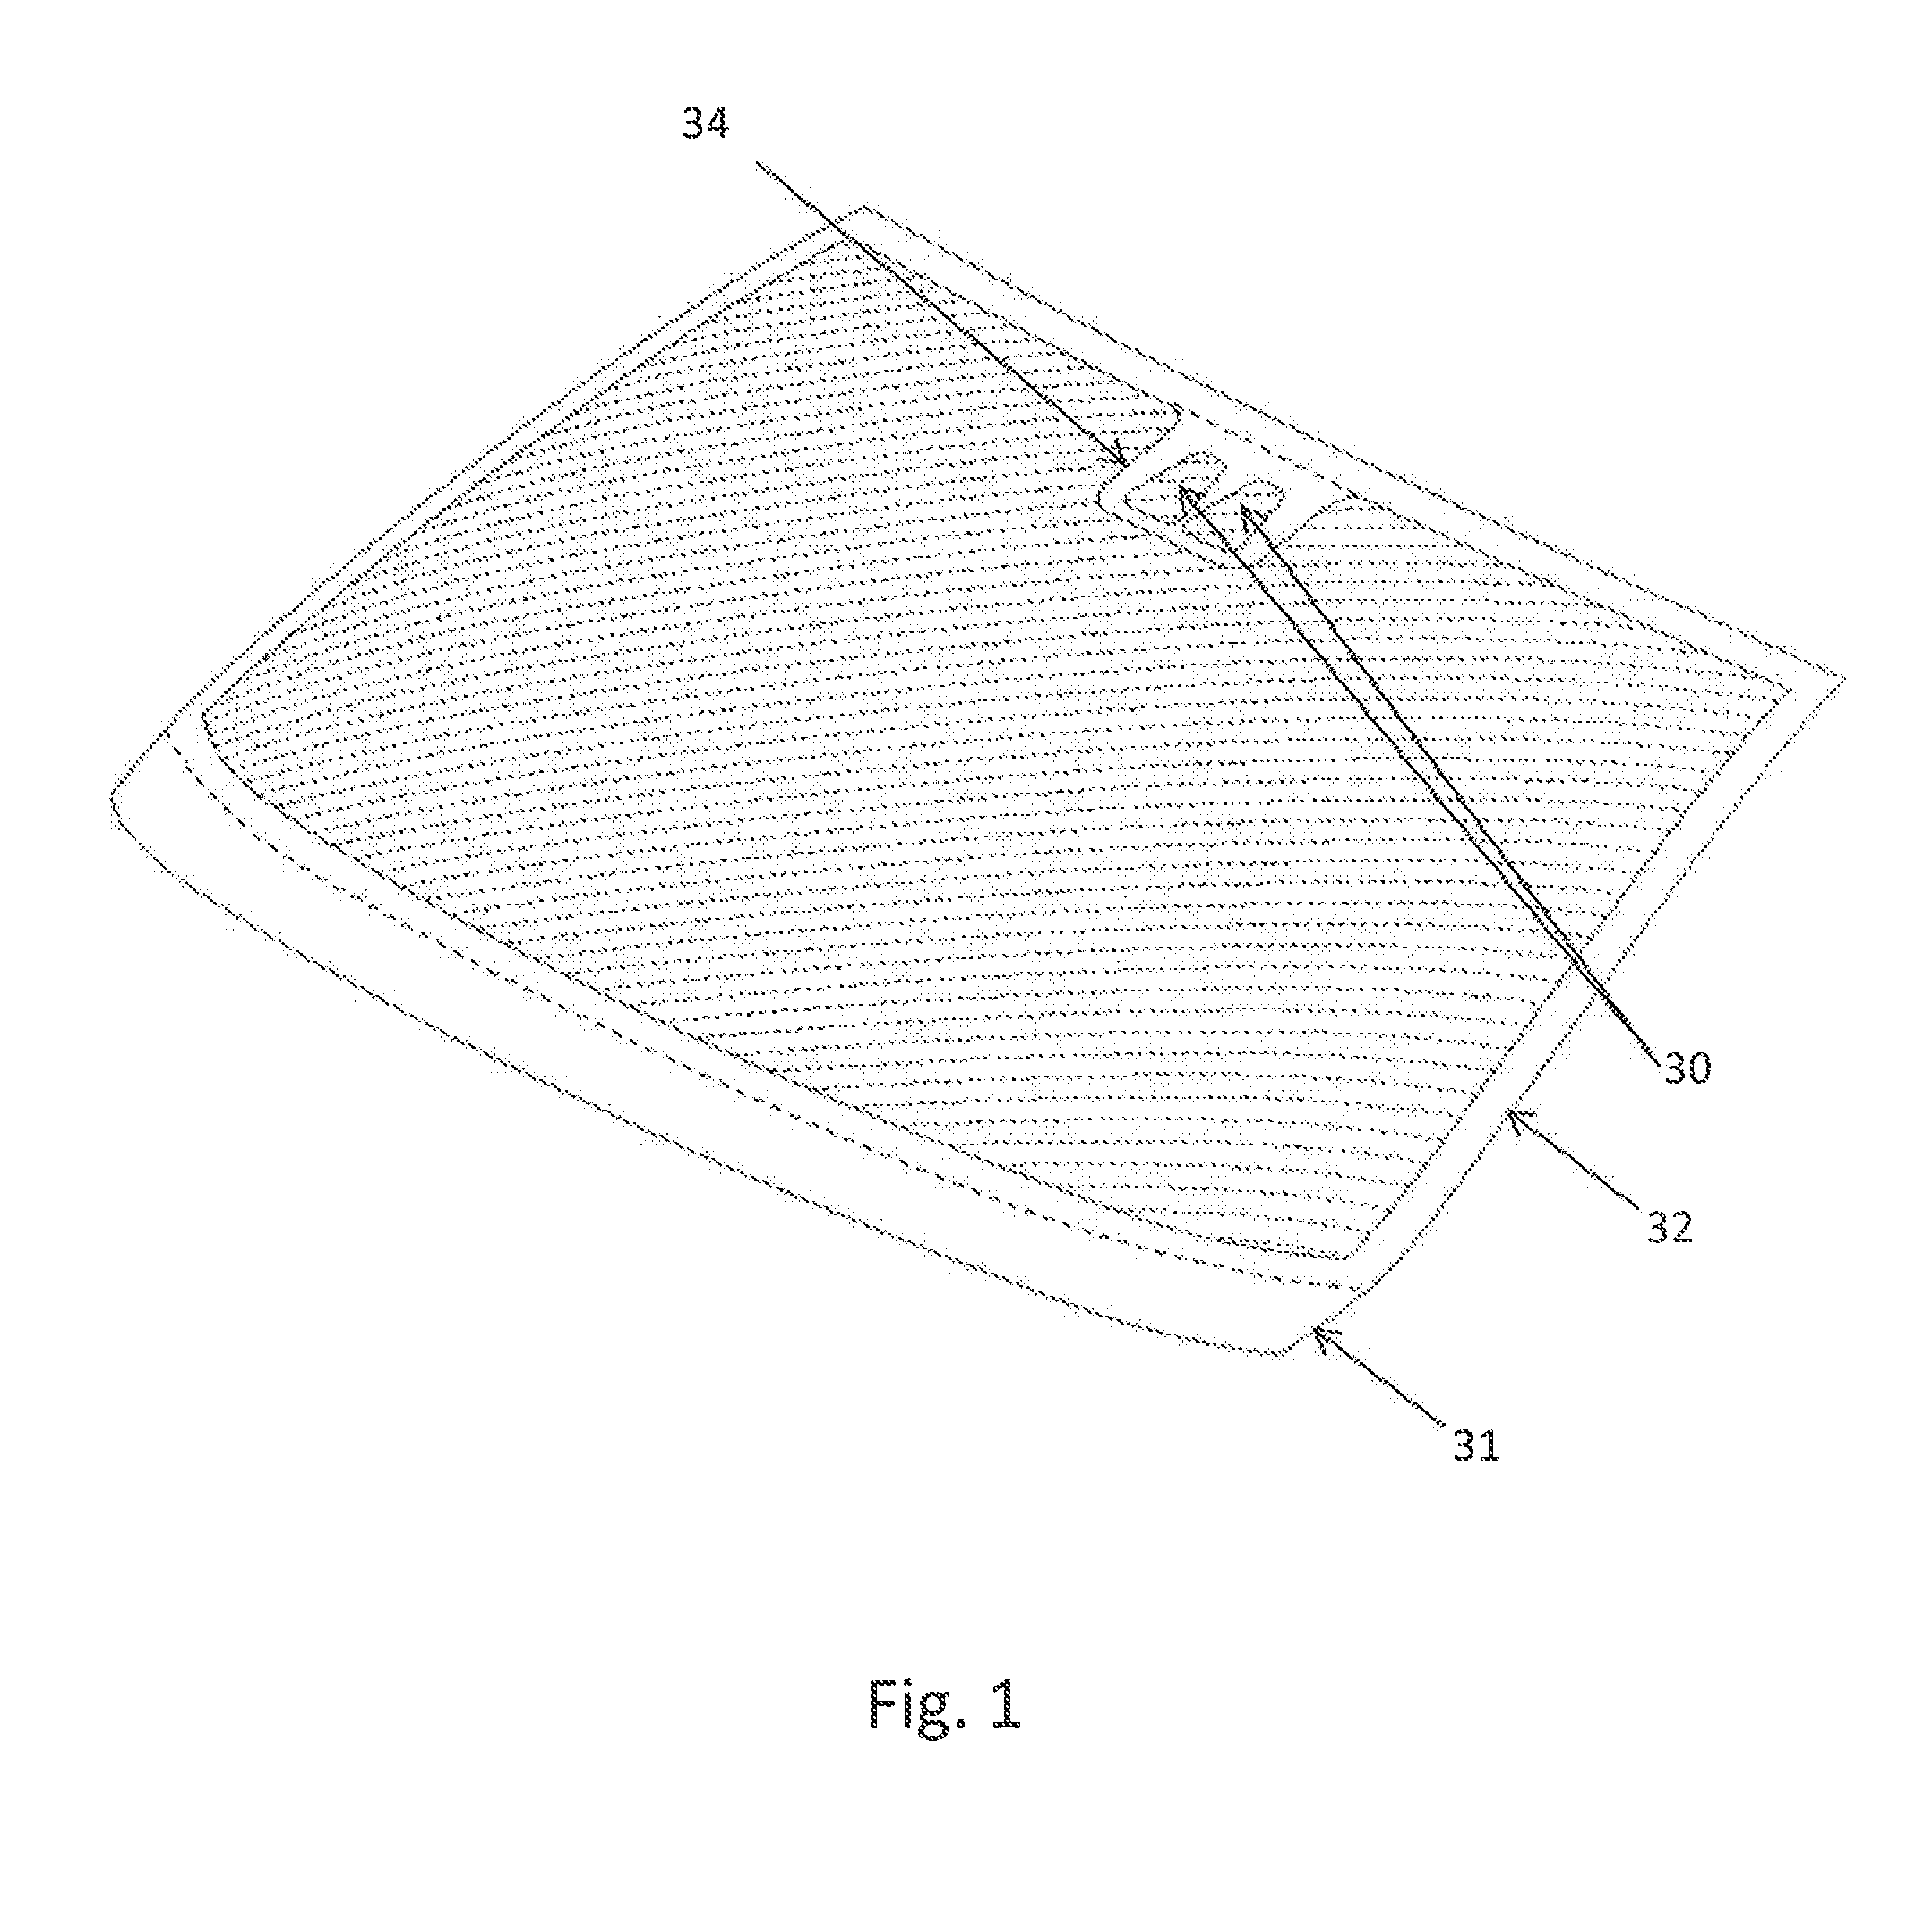 Obscuration having superior strength and optical quality for a laminated automotive windshield